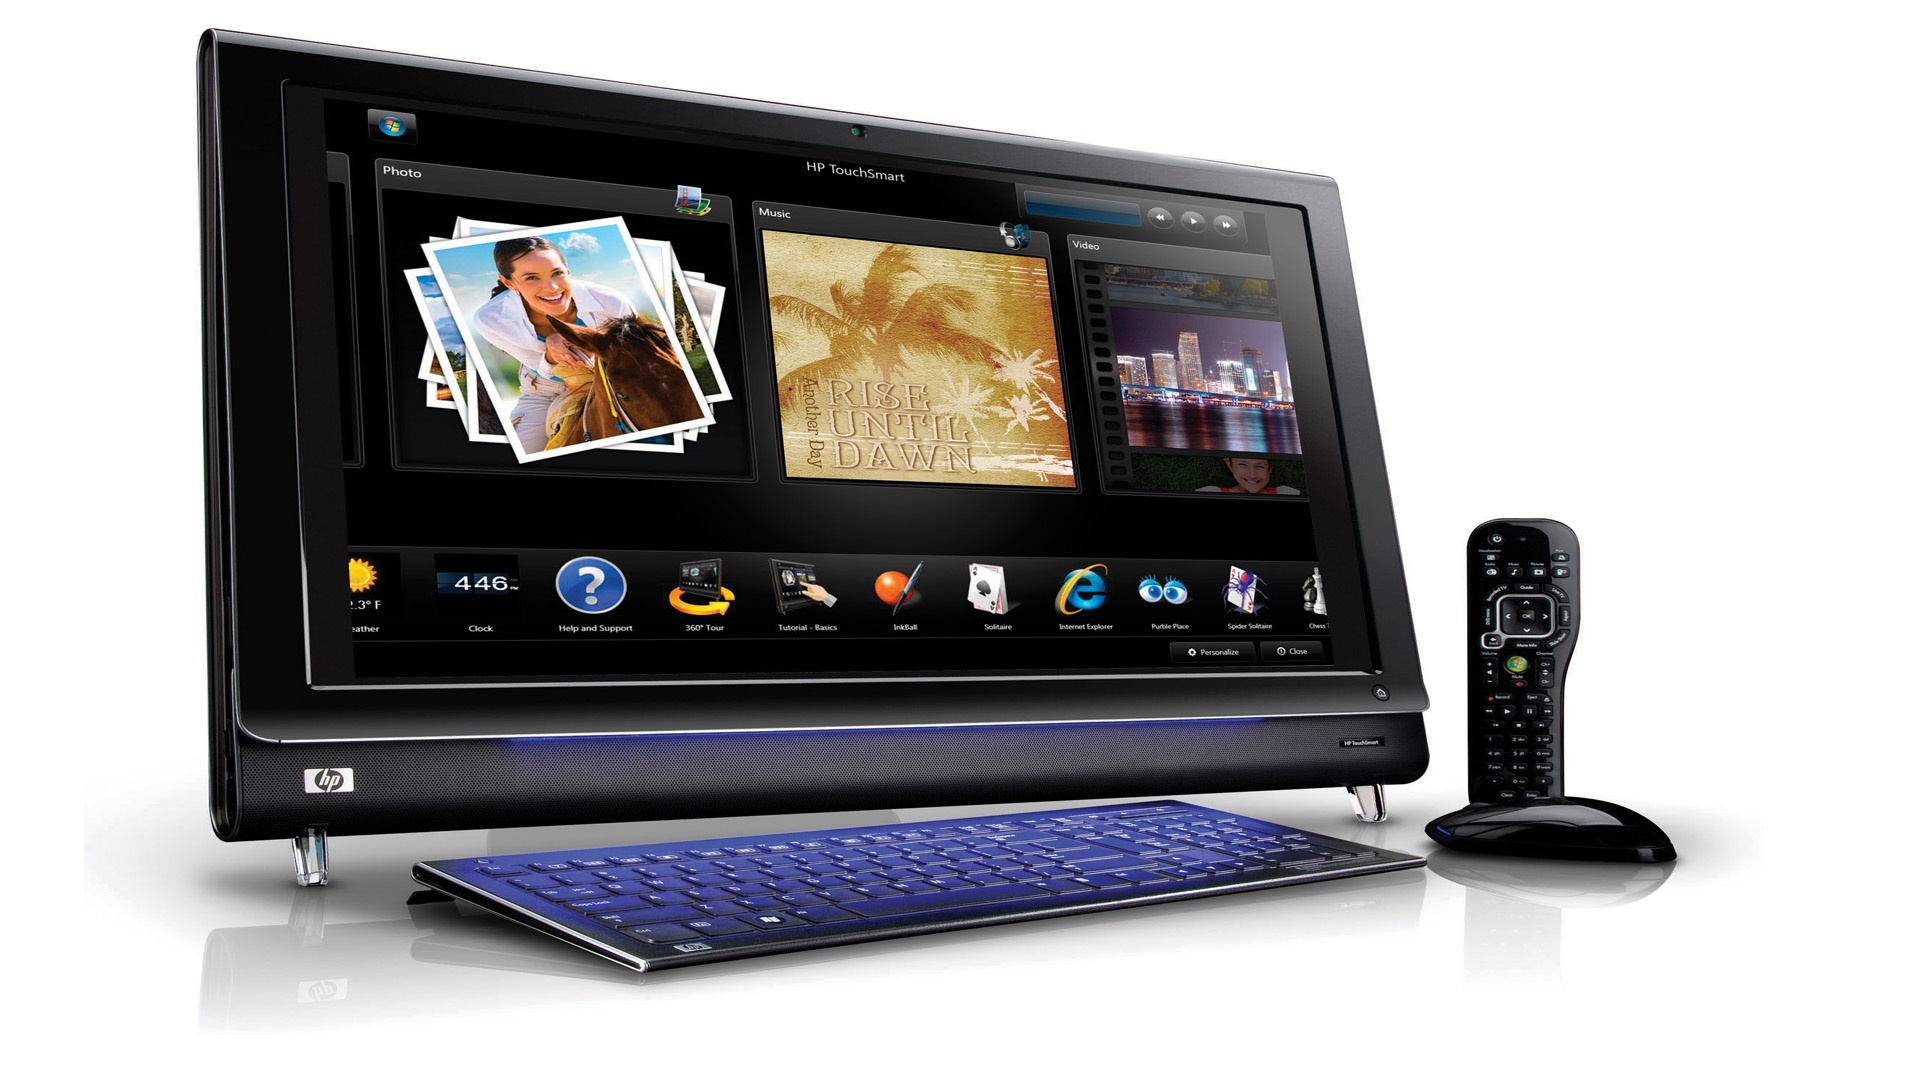 Hp Touchsmart Pc For Your